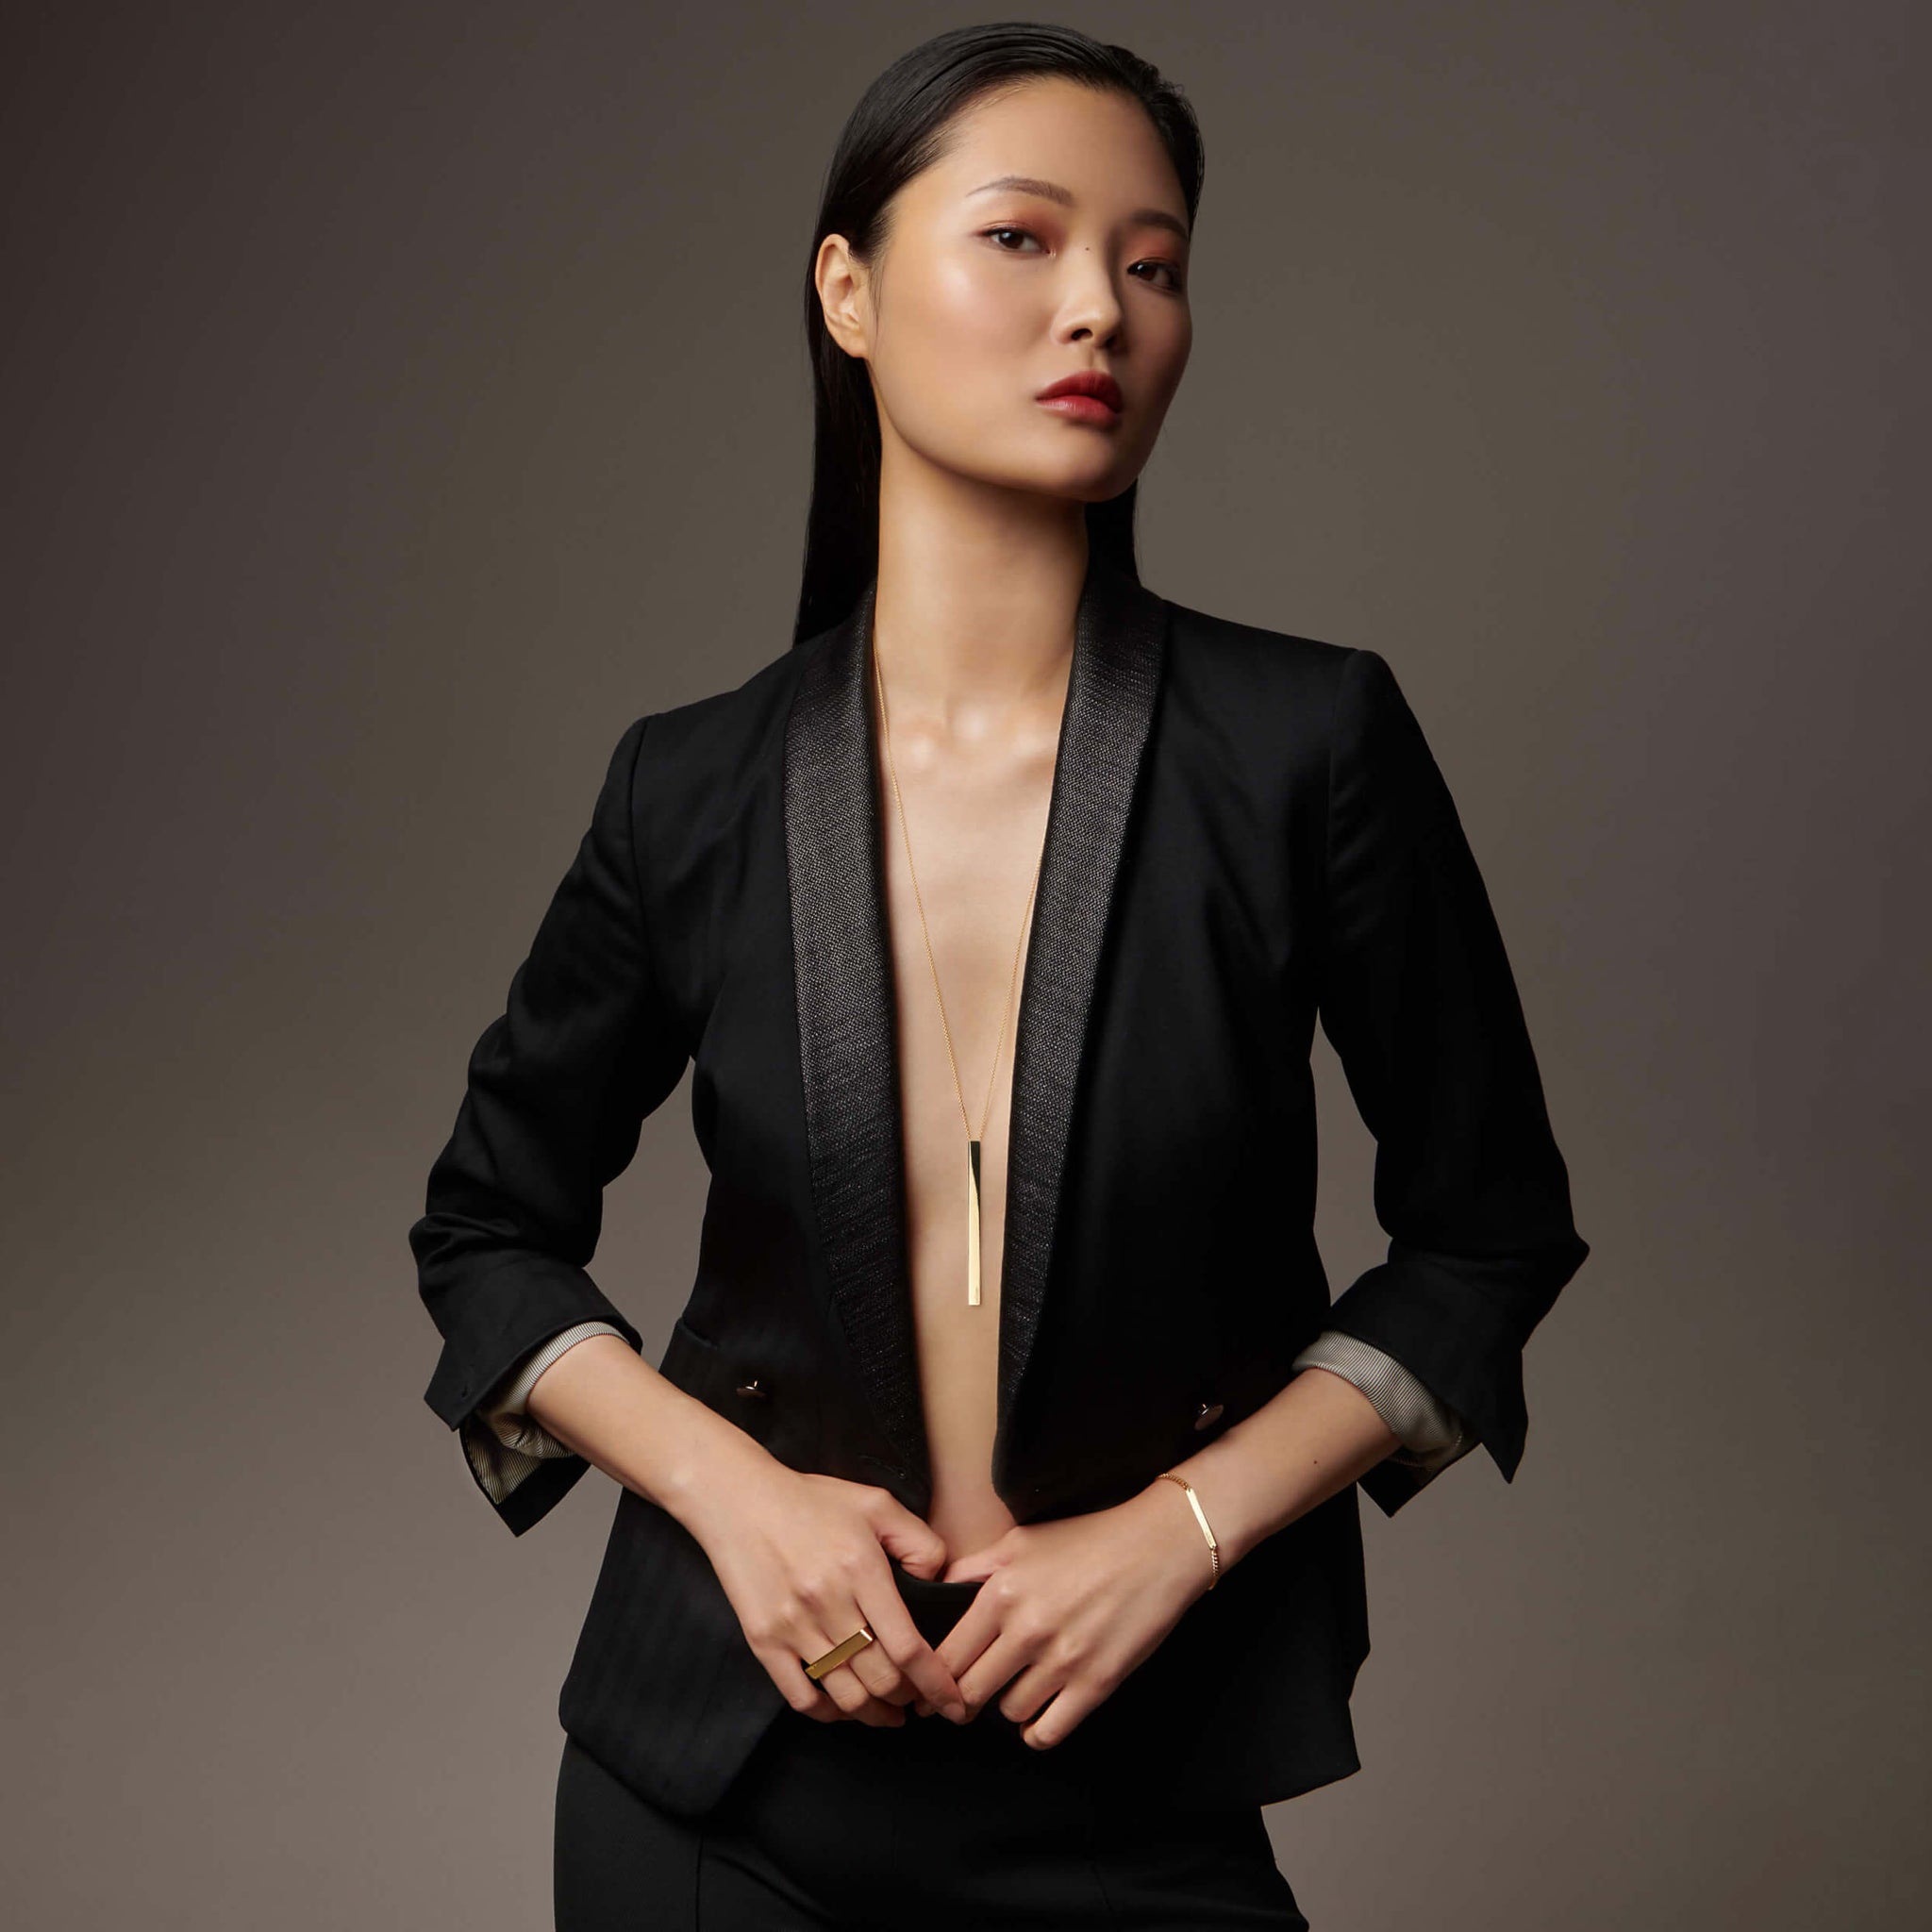 Woman standing with suit jacket on wearing atelium jewelry